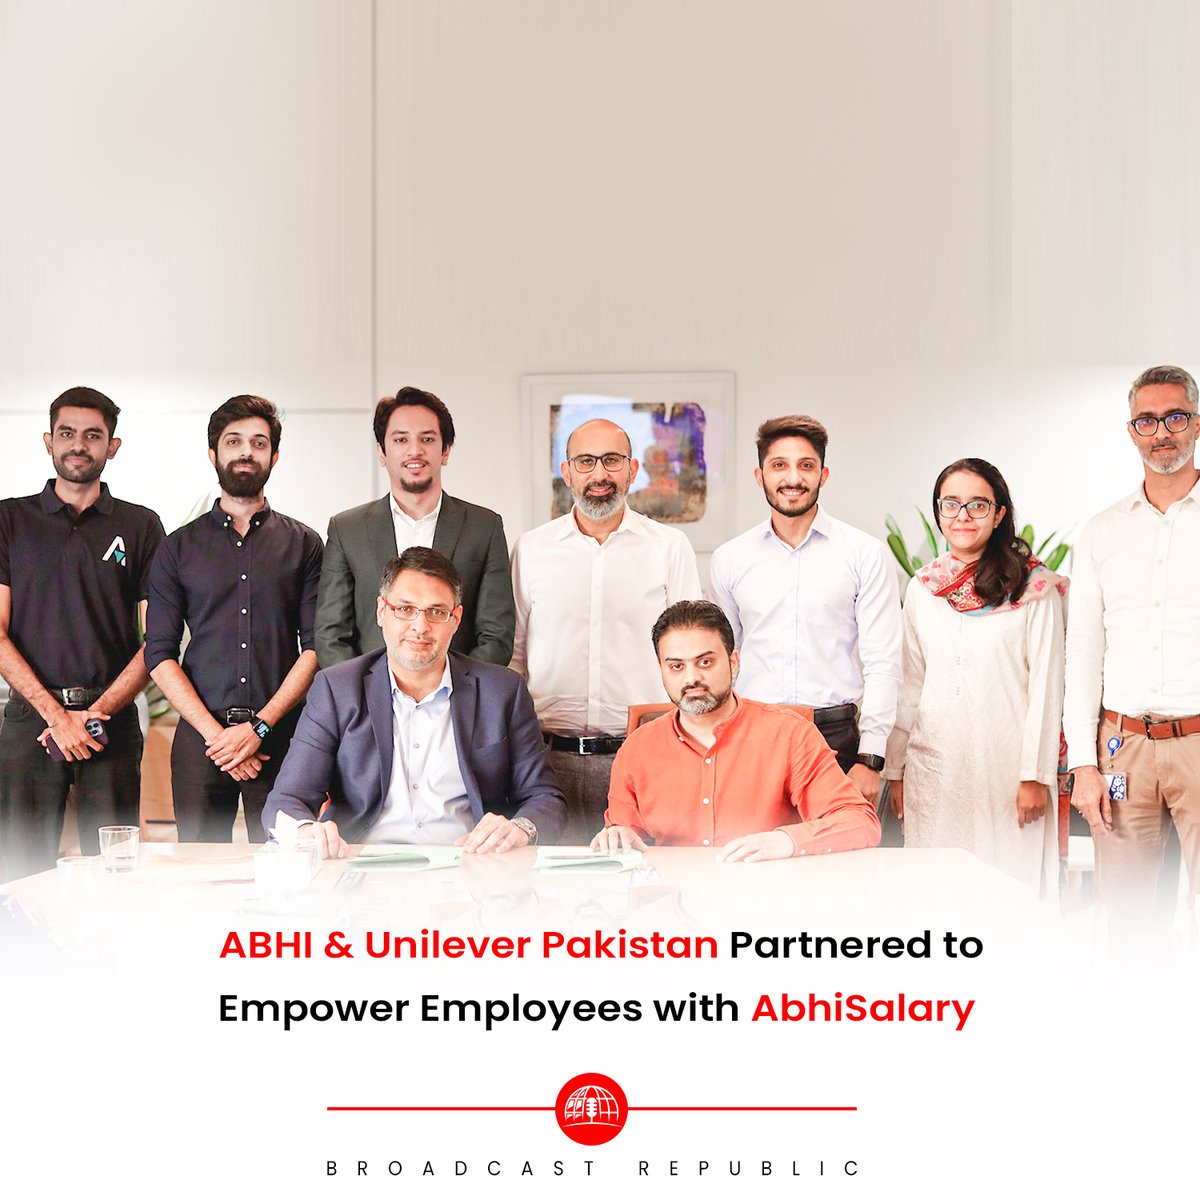 ABHI, an embedded finance platform, has partnered with Unilever Pakistan, a global FMCG company with a presence in 190 countries, to offer AbhiSalary - an Earned Wage Access (EWA) solution. 

#ABHI #UnileverPakistan #AbhiSalary #EmpowerEmployees